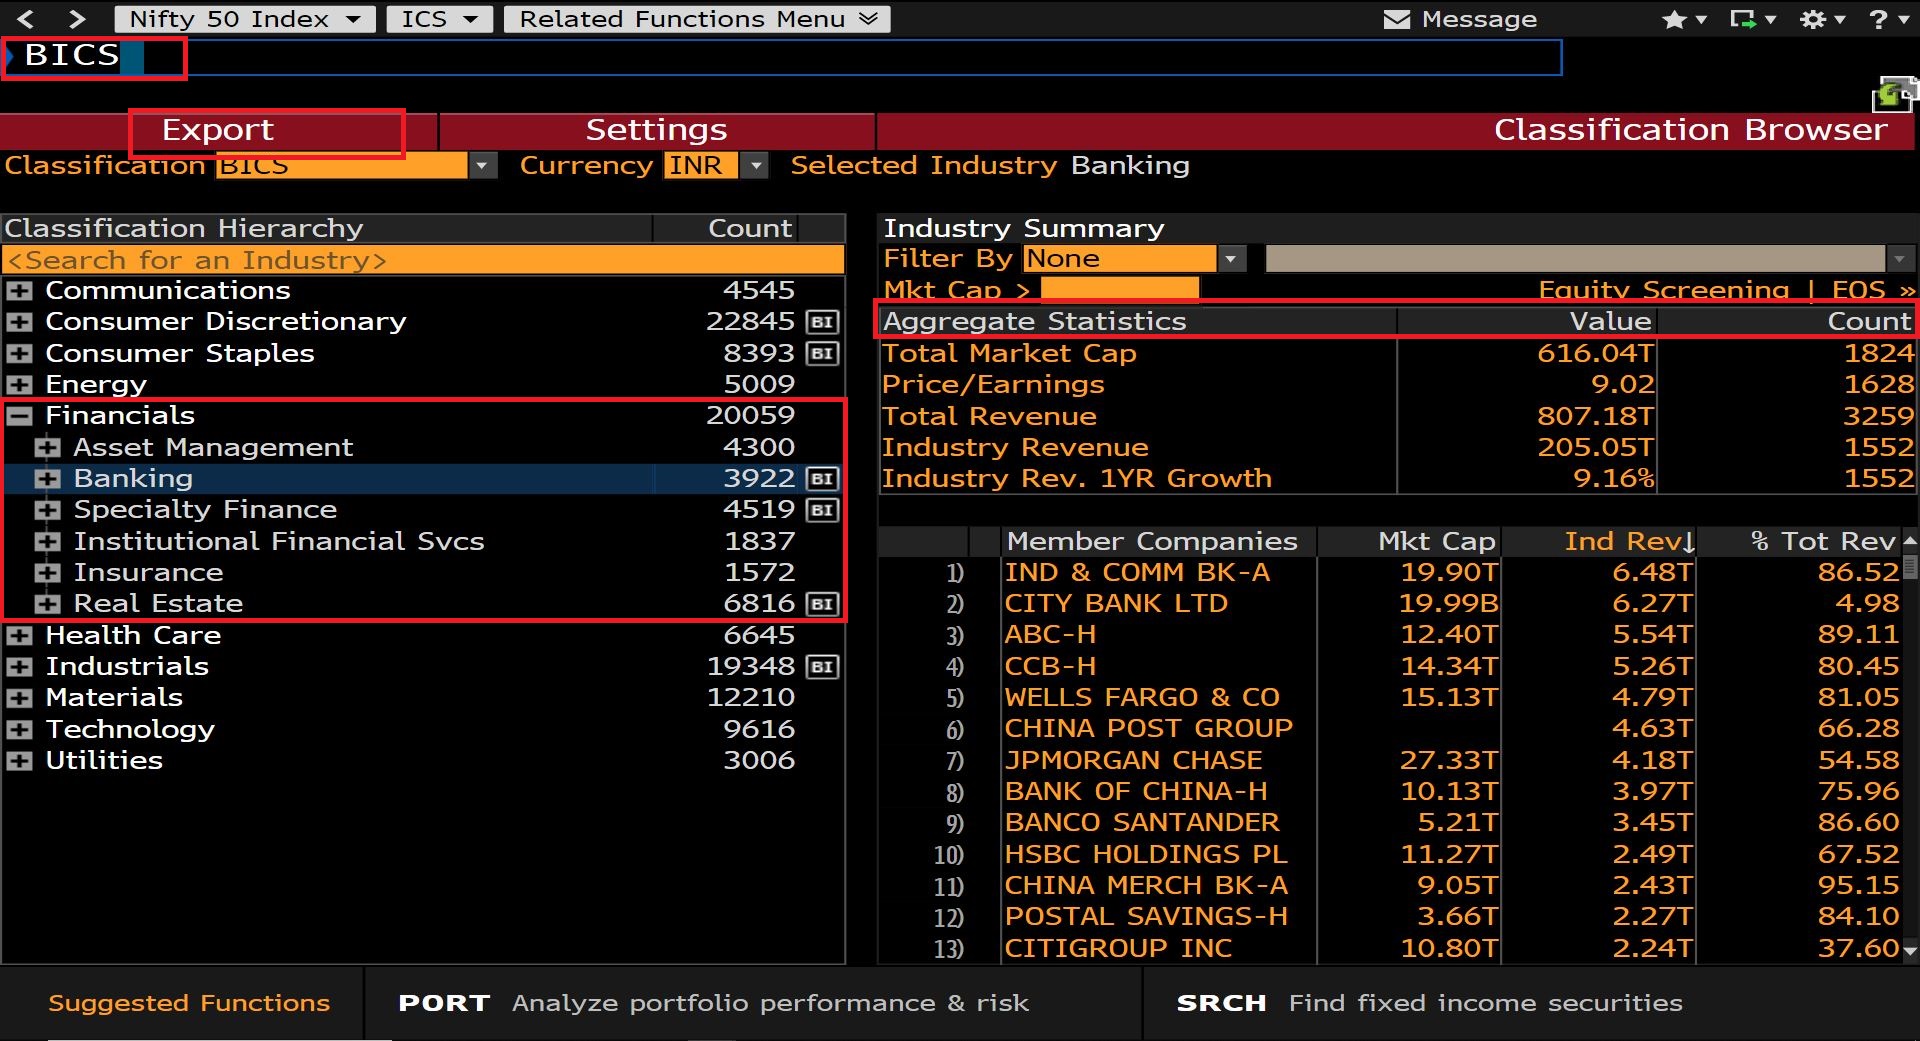 Login to Bloomberg (Available in Library) then Search for BICS and Select Financials and Select Required Industry